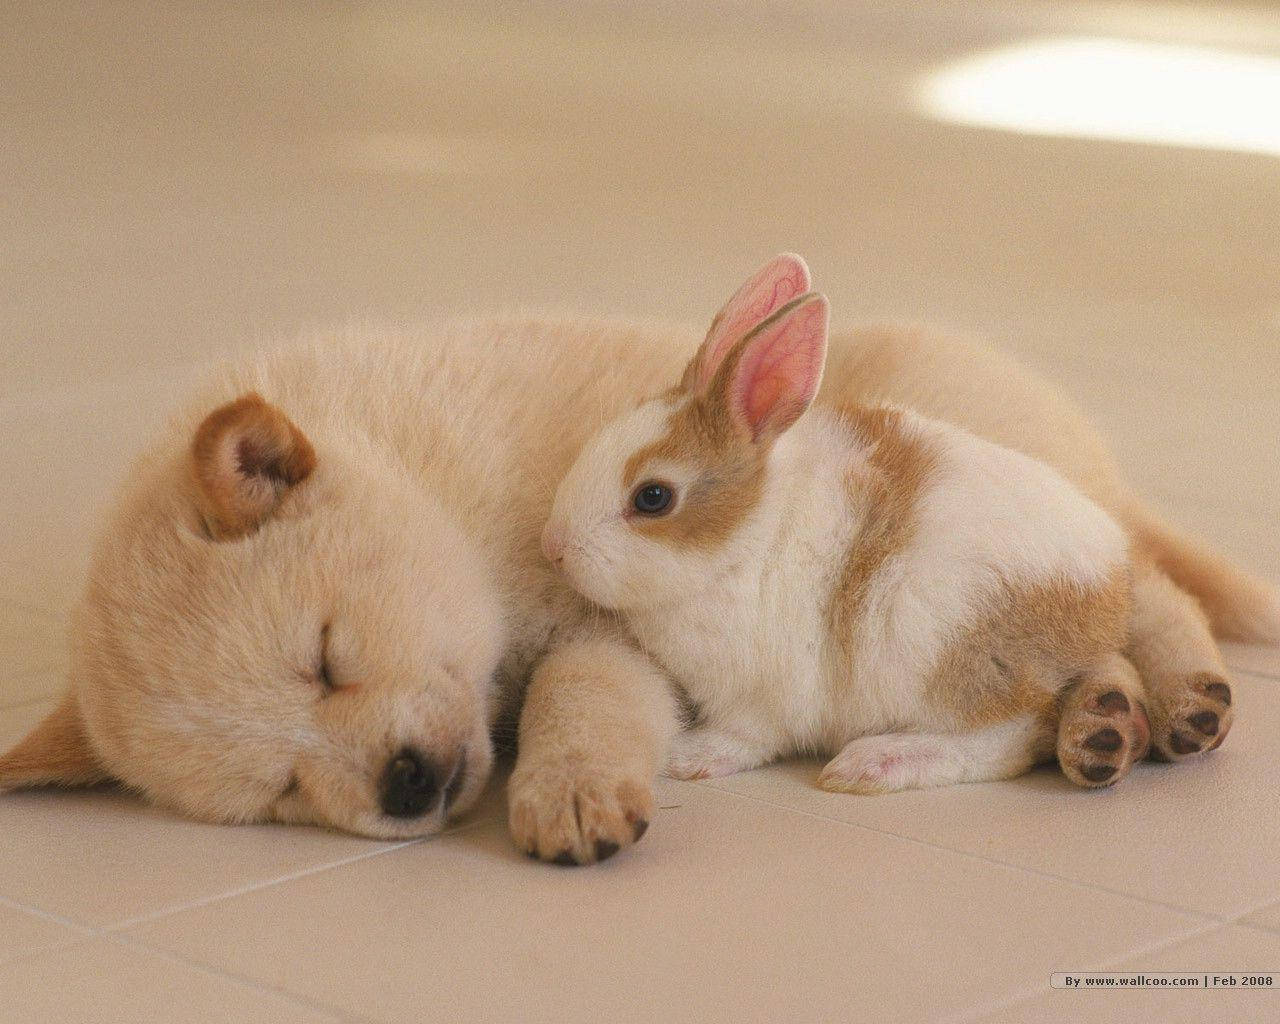 Sleeping Cute Puppy With Bunny Wallpaper